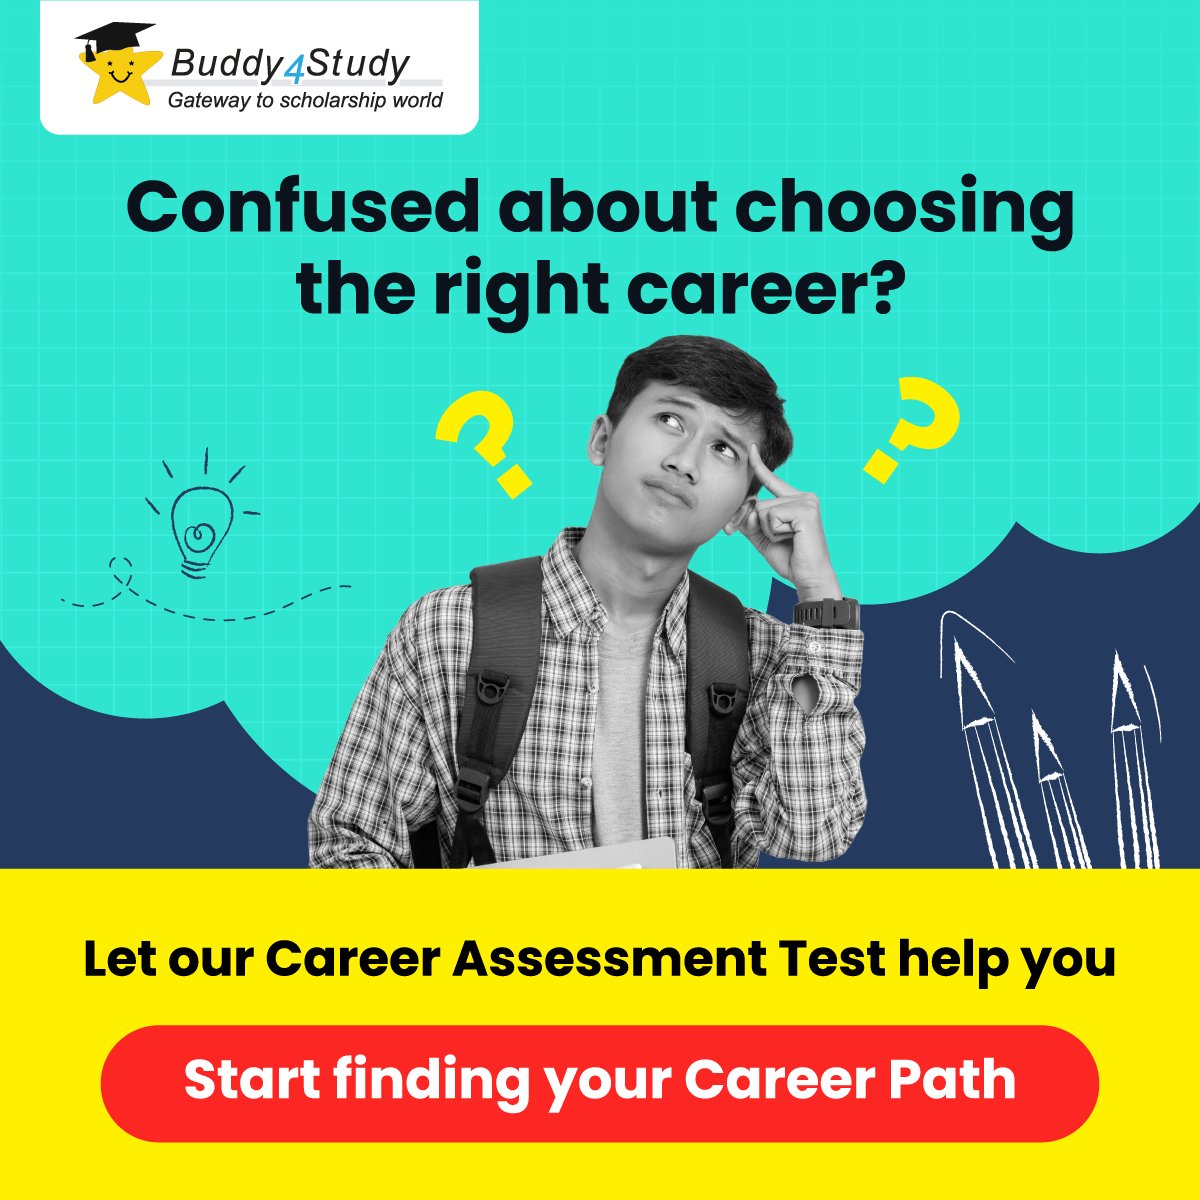 Discover your true potential with Buddy4Study's Career Assessment Test, at just ₹299! Take the test & subscribe now to unlock personalised insights to shape your future! buddy4study.com/psychometric-t… #CareerAssessmentTest #CareerGuidance #CareerPath #Buddy4Study